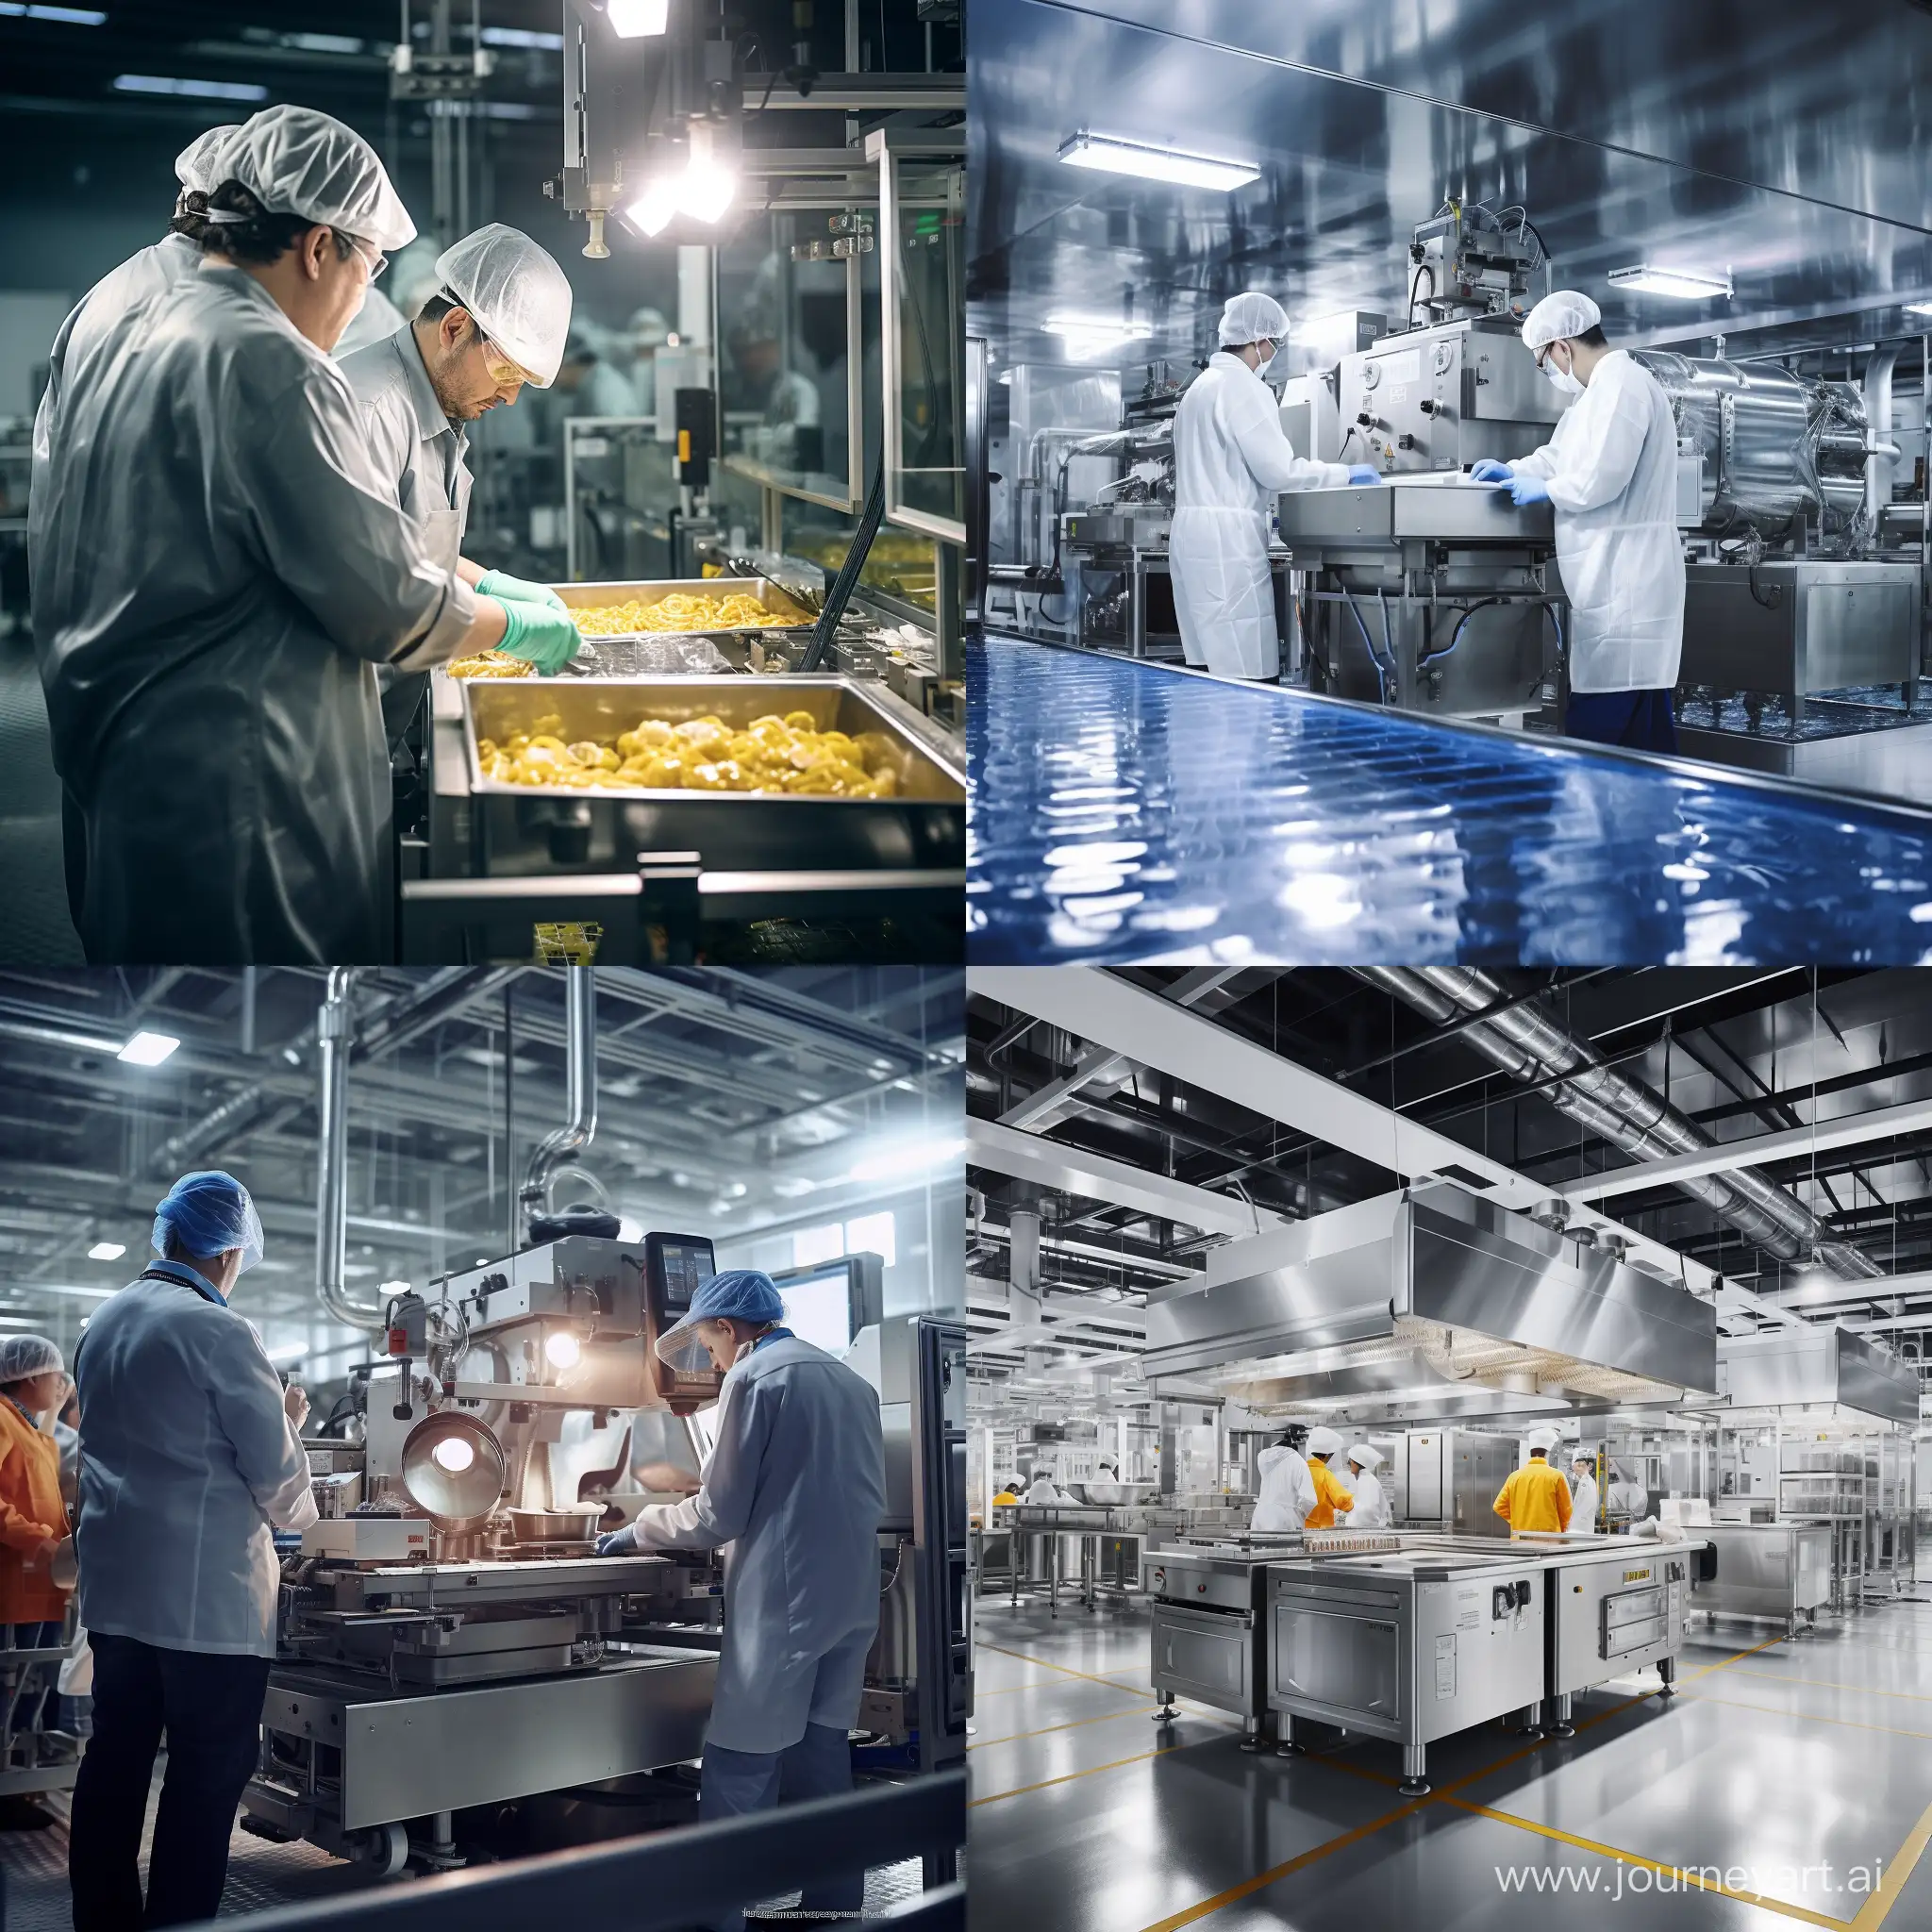 Precision-Operation-in-StateoftheArt-Food-Processing-Facility